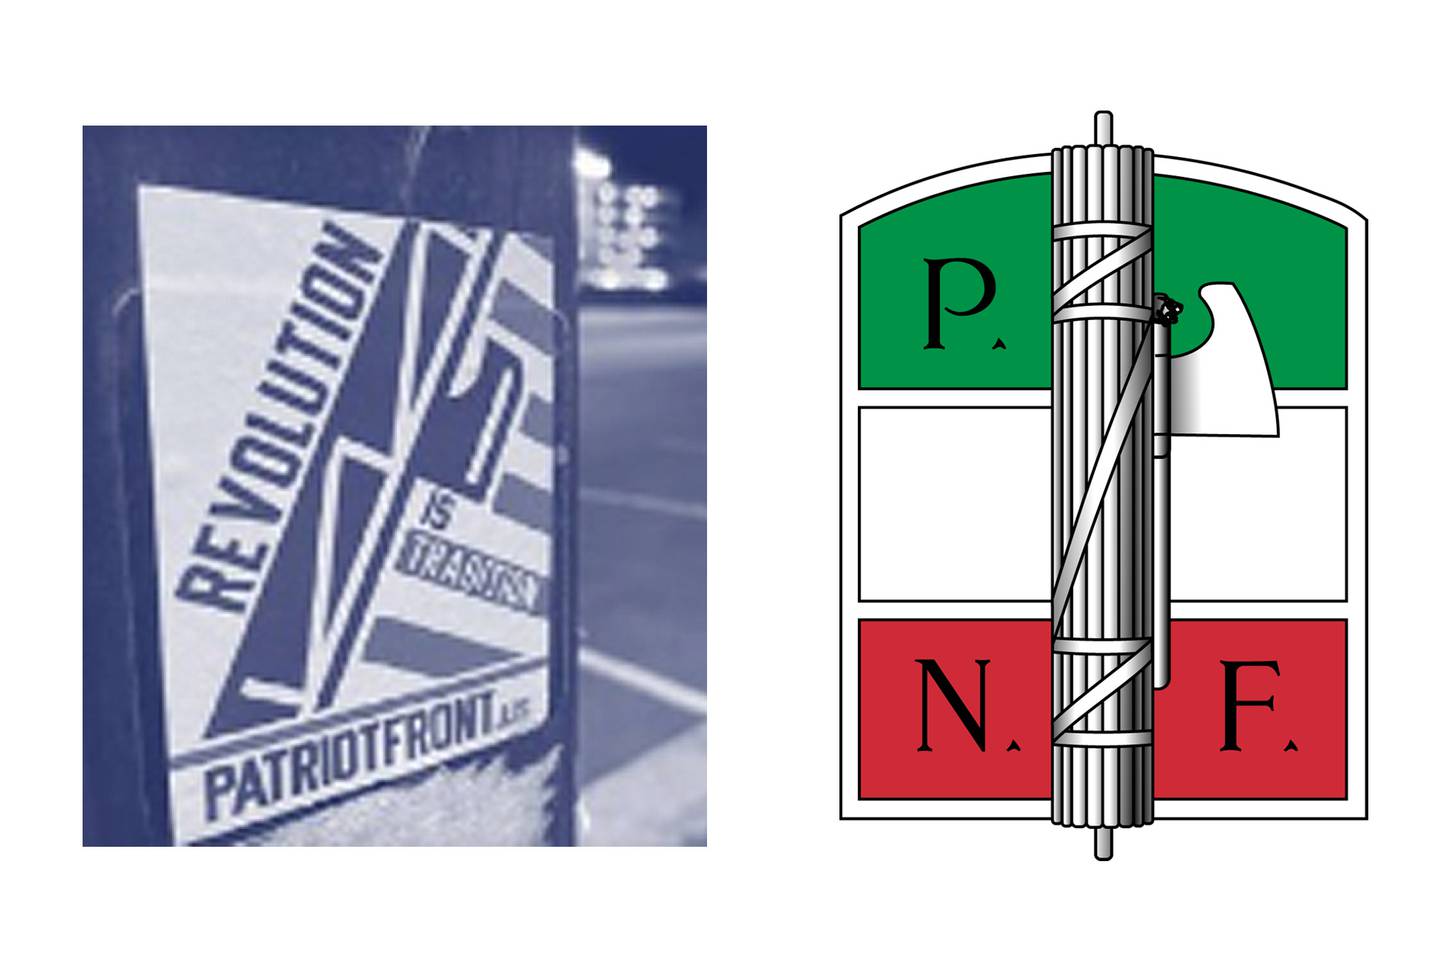 Photograph of a Patriot Front sticker with fasces on left, illustration of historic logo of Italian National Fascist Party featuring fasces on right.